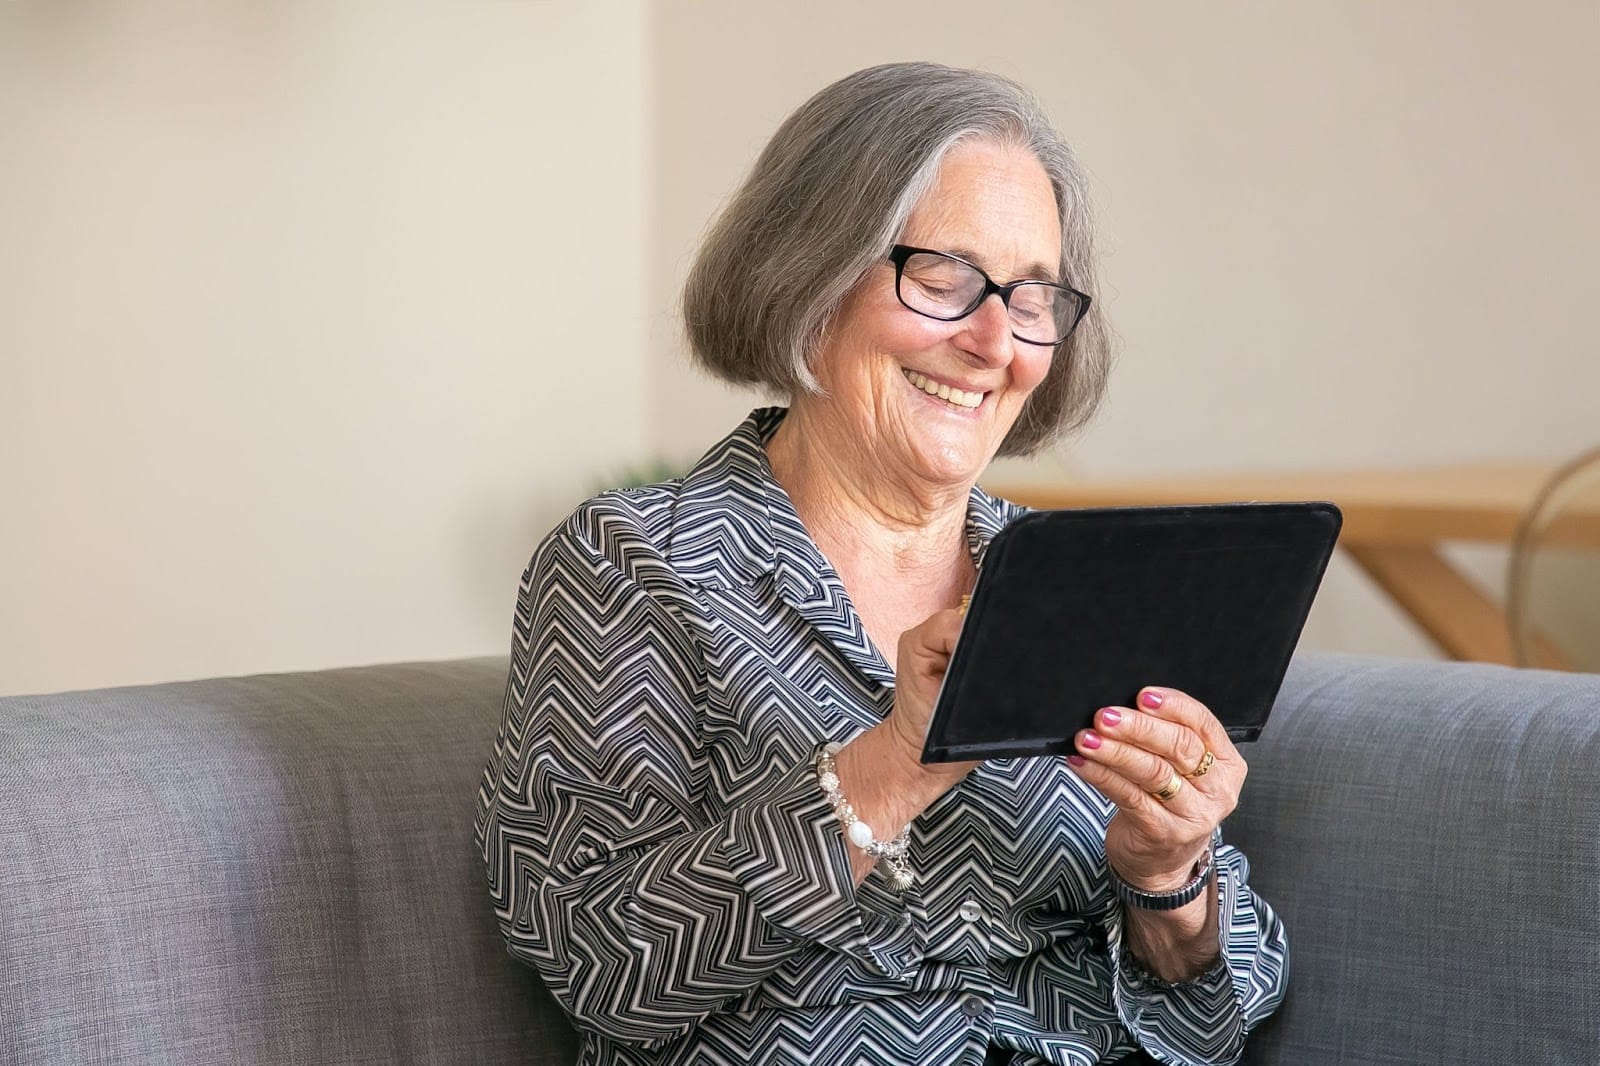 A senior citizen smiling while holding a digital tablet